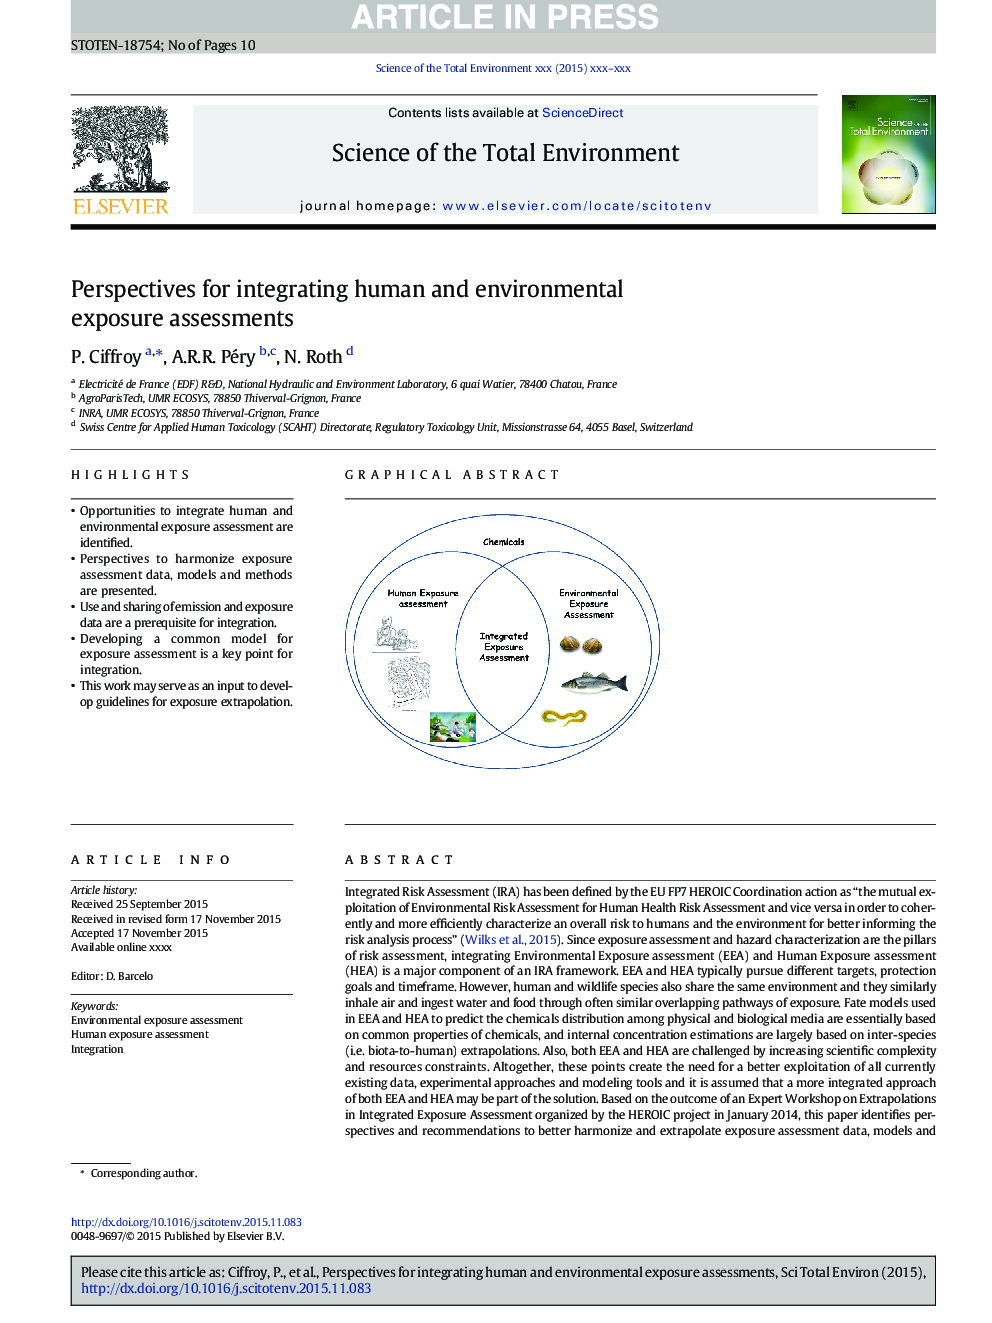 Perspectives for integrating human and environmental exposure assessments